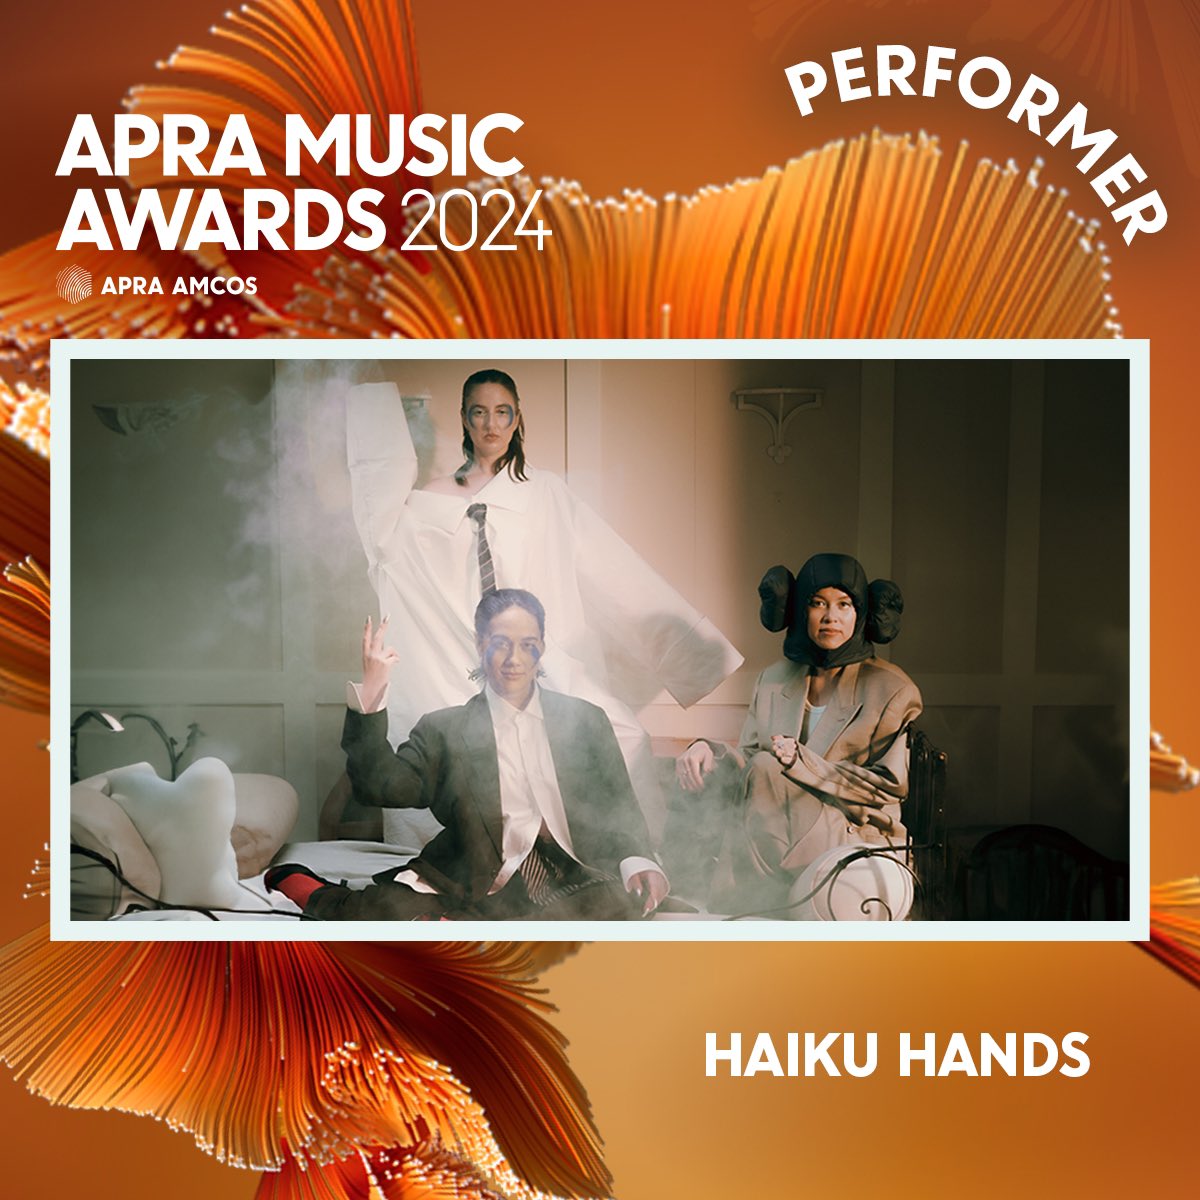 📣 @haiku_hands are performing at this years @APRAAMCOS Music Awards 🤩🏆 We can't wait for you to see what they've got cooked up - it's going to be so good!